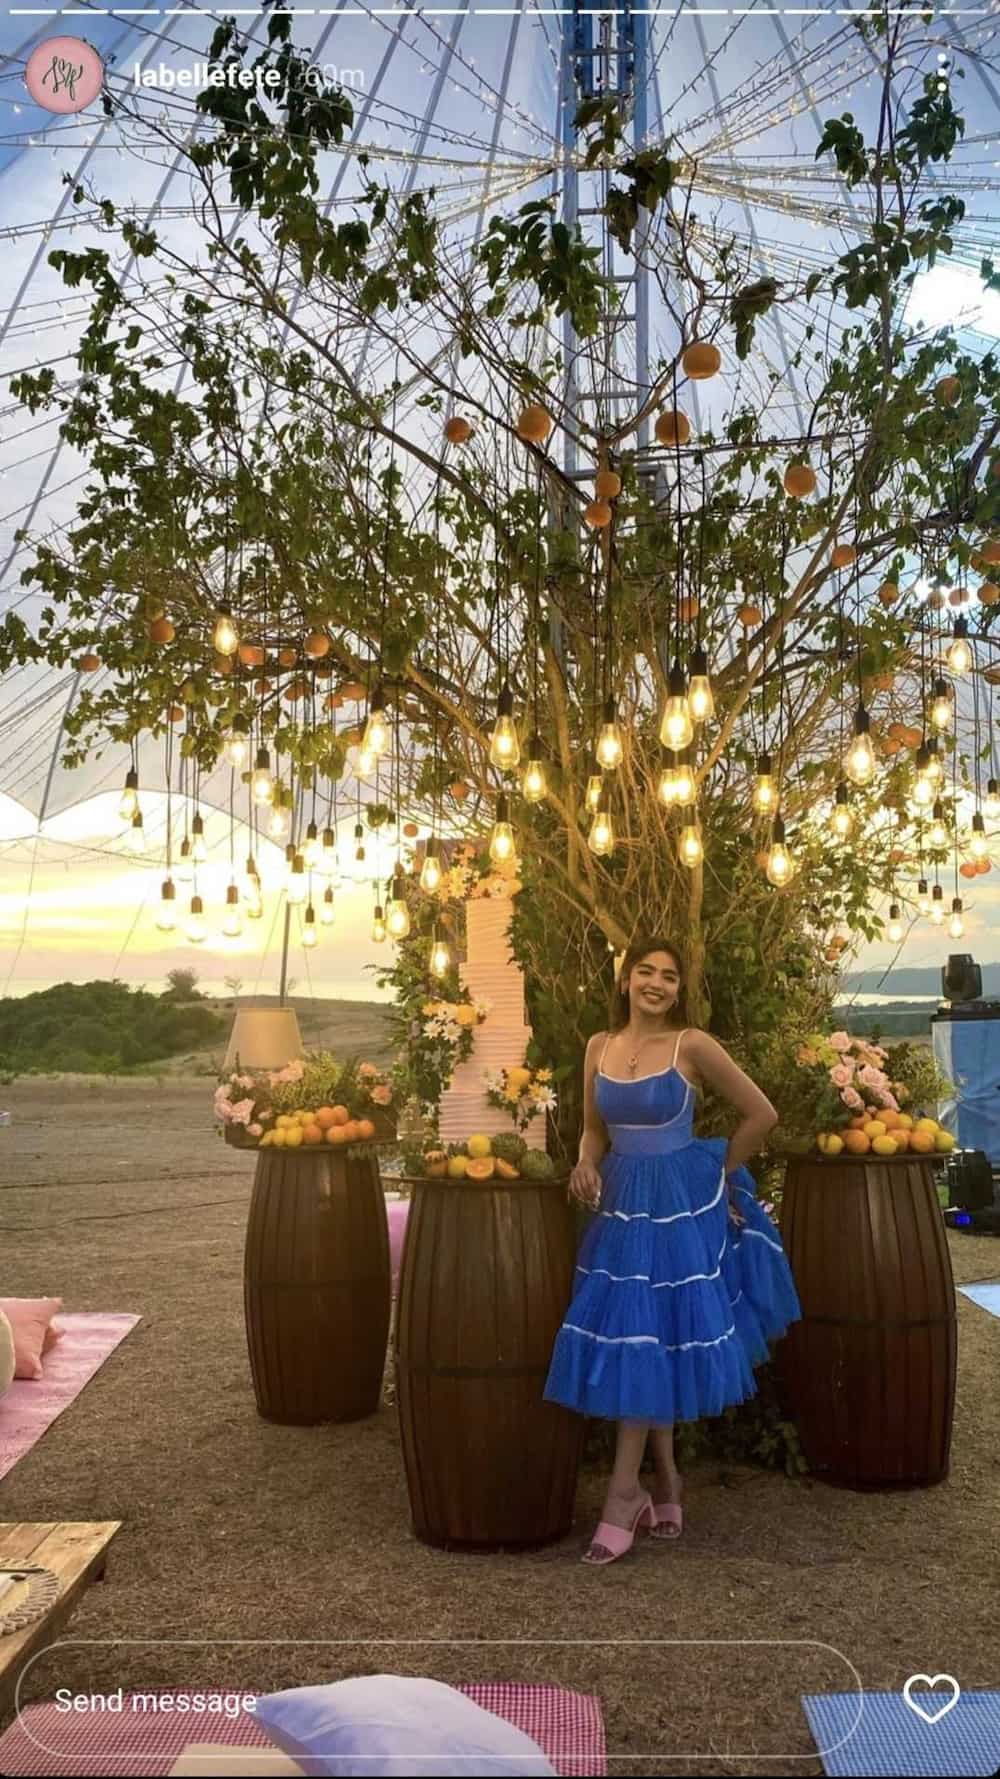 Pictures from Andrea Brillantes' birthday picnic celebration go viral